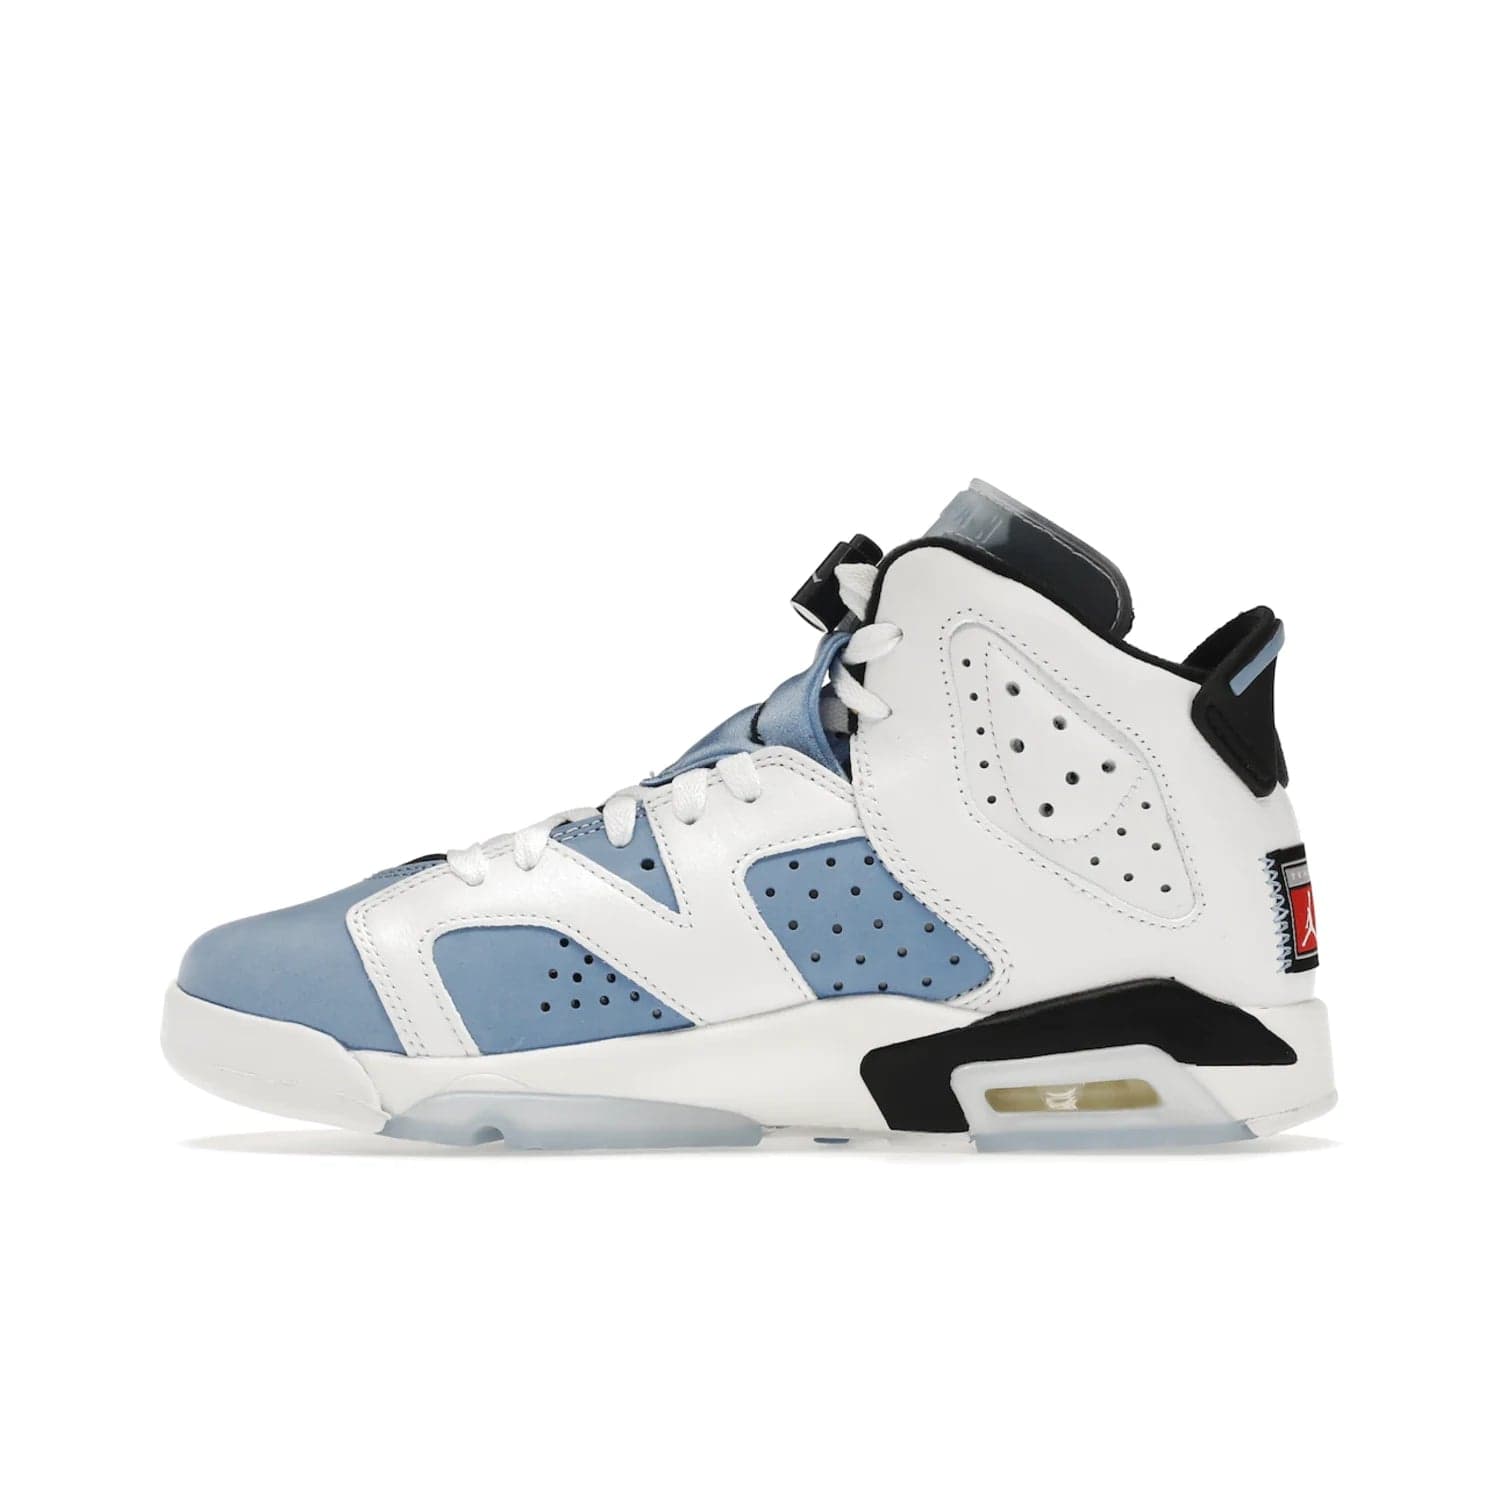 Jordan 6 Retro UNC White (GS) - Image 19 - Only at www.BallersClubKickz.com - Air Jordan 6 Retro UNC White GS: Michael Jordan alma mater, UNC Tar Heels, featuring colorway, nubuck, leather, Jumpman branding and a visible Air unit. Translucent blue/white outsole, perfect for completing sneaker rotation.